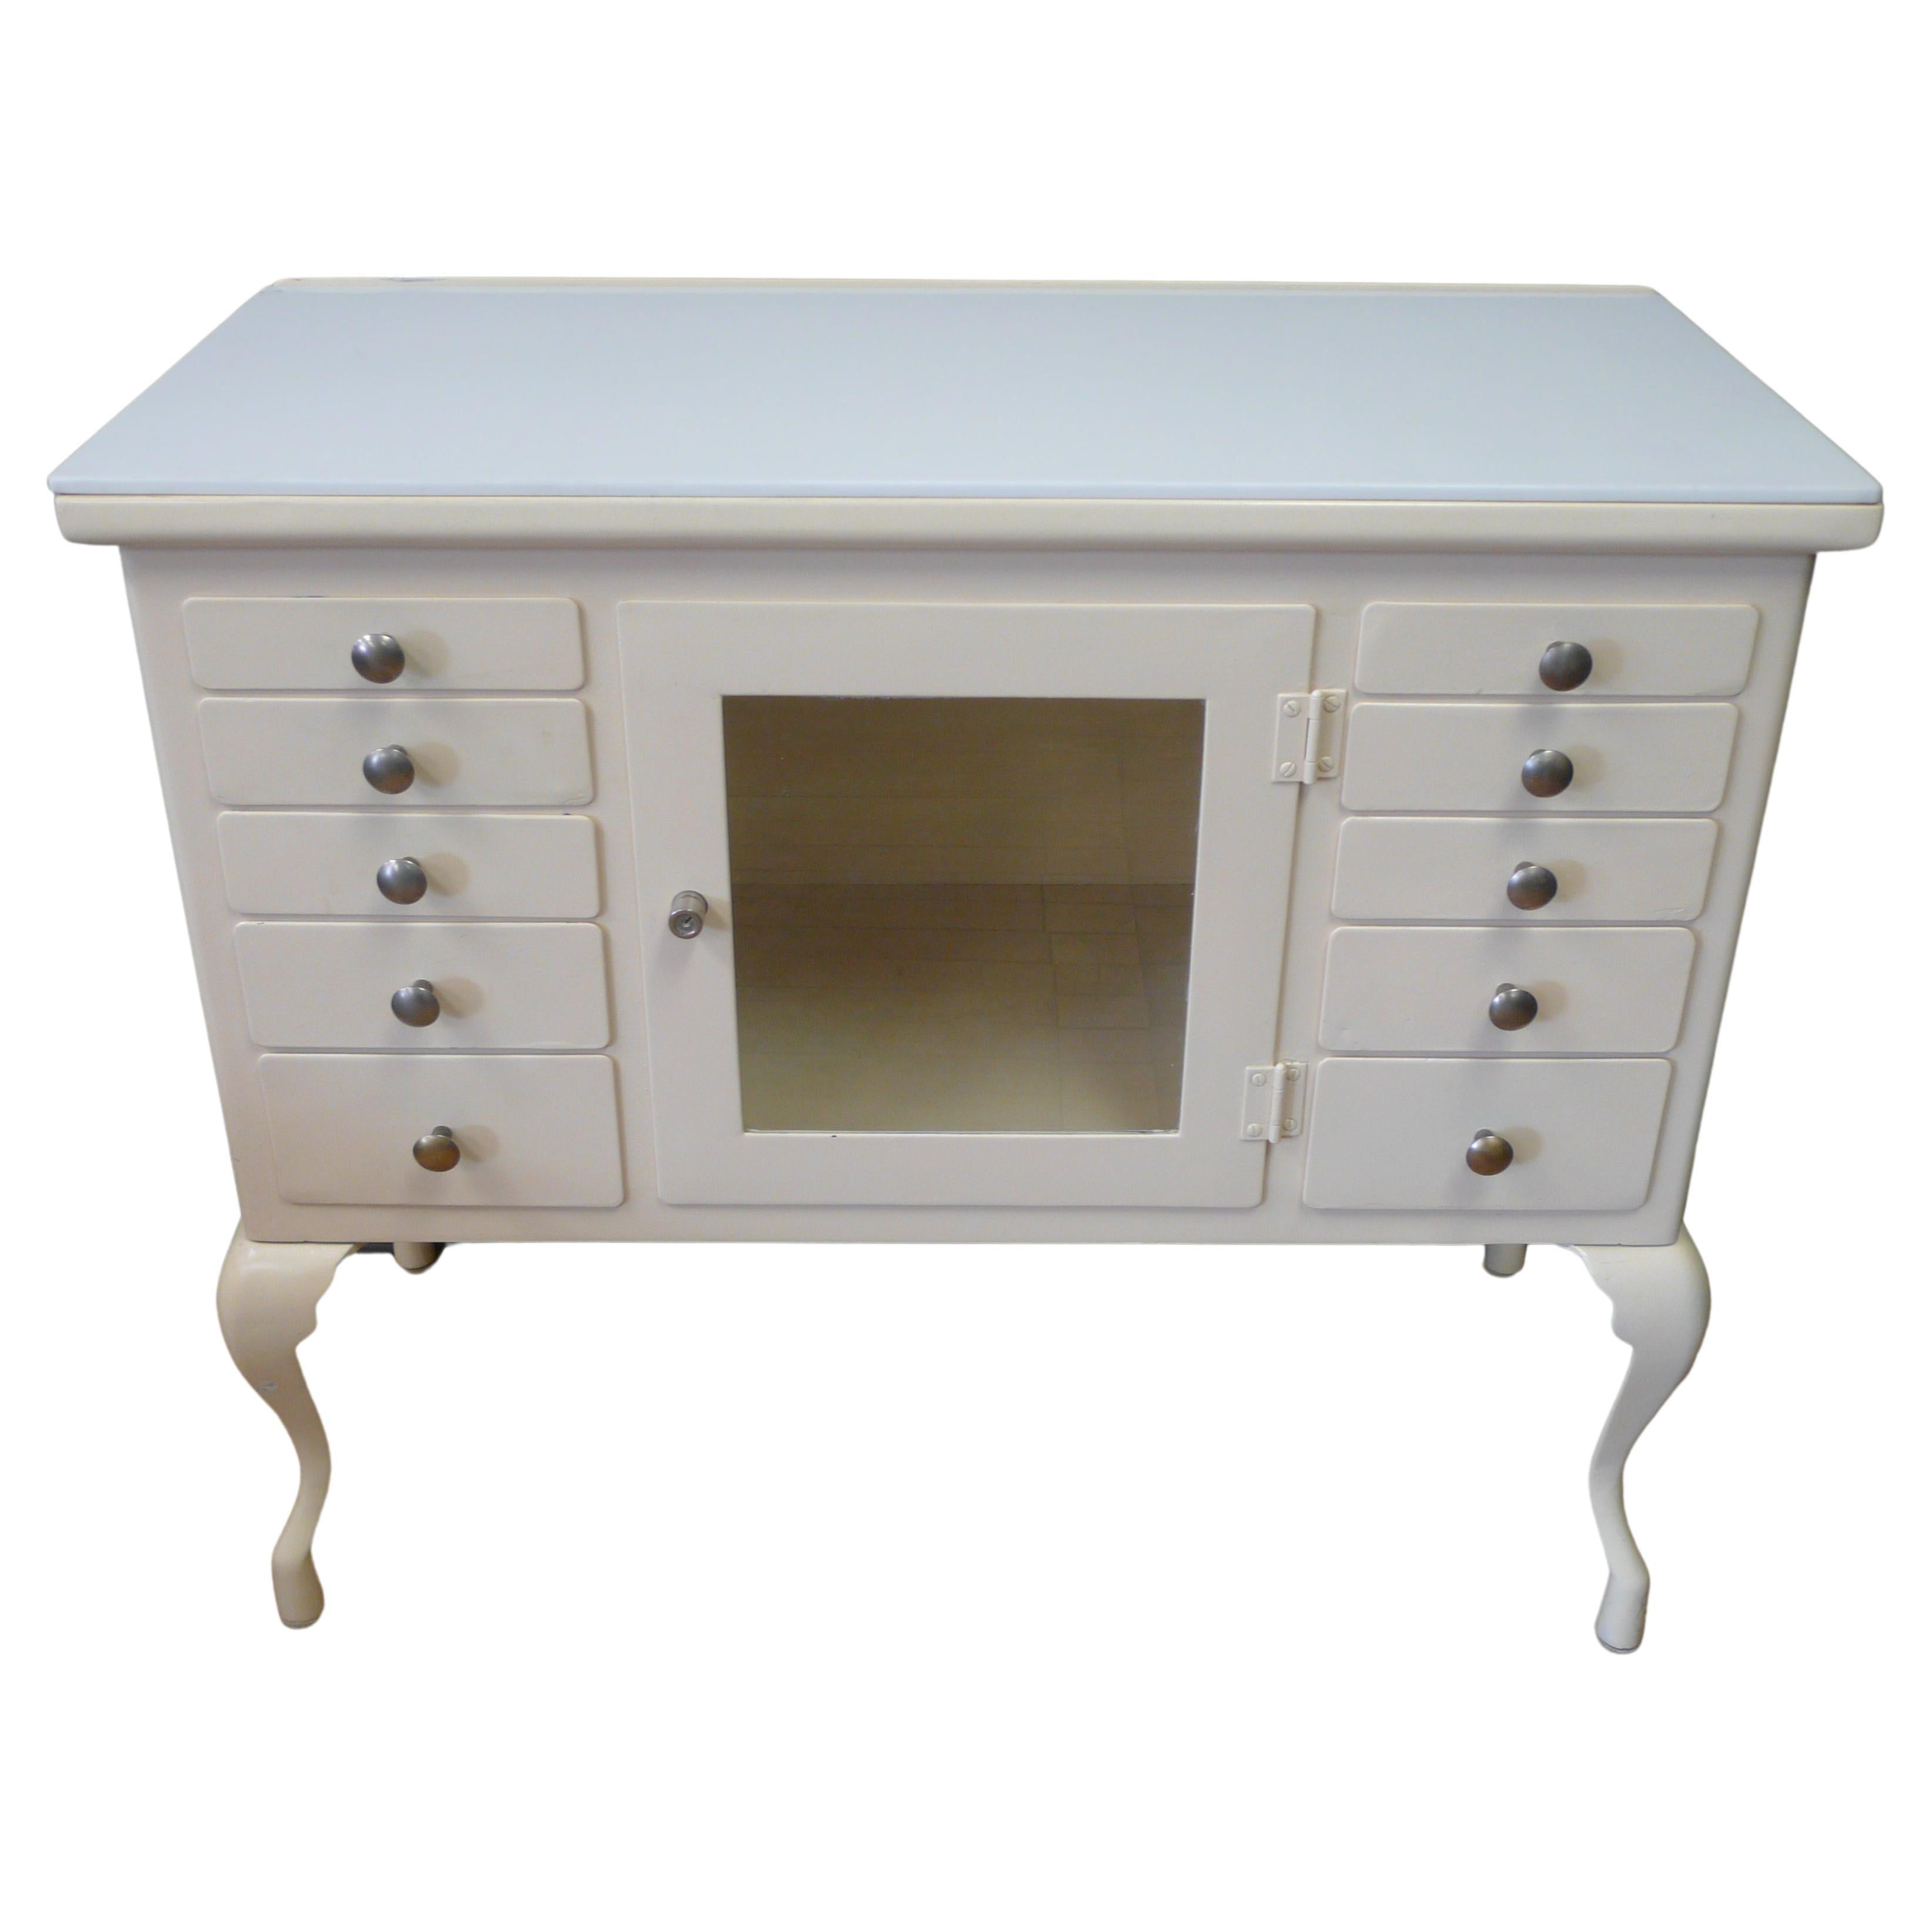 Apothecary Medical Cabinet circa 1910 cabriole legs, milk glass top, refinished